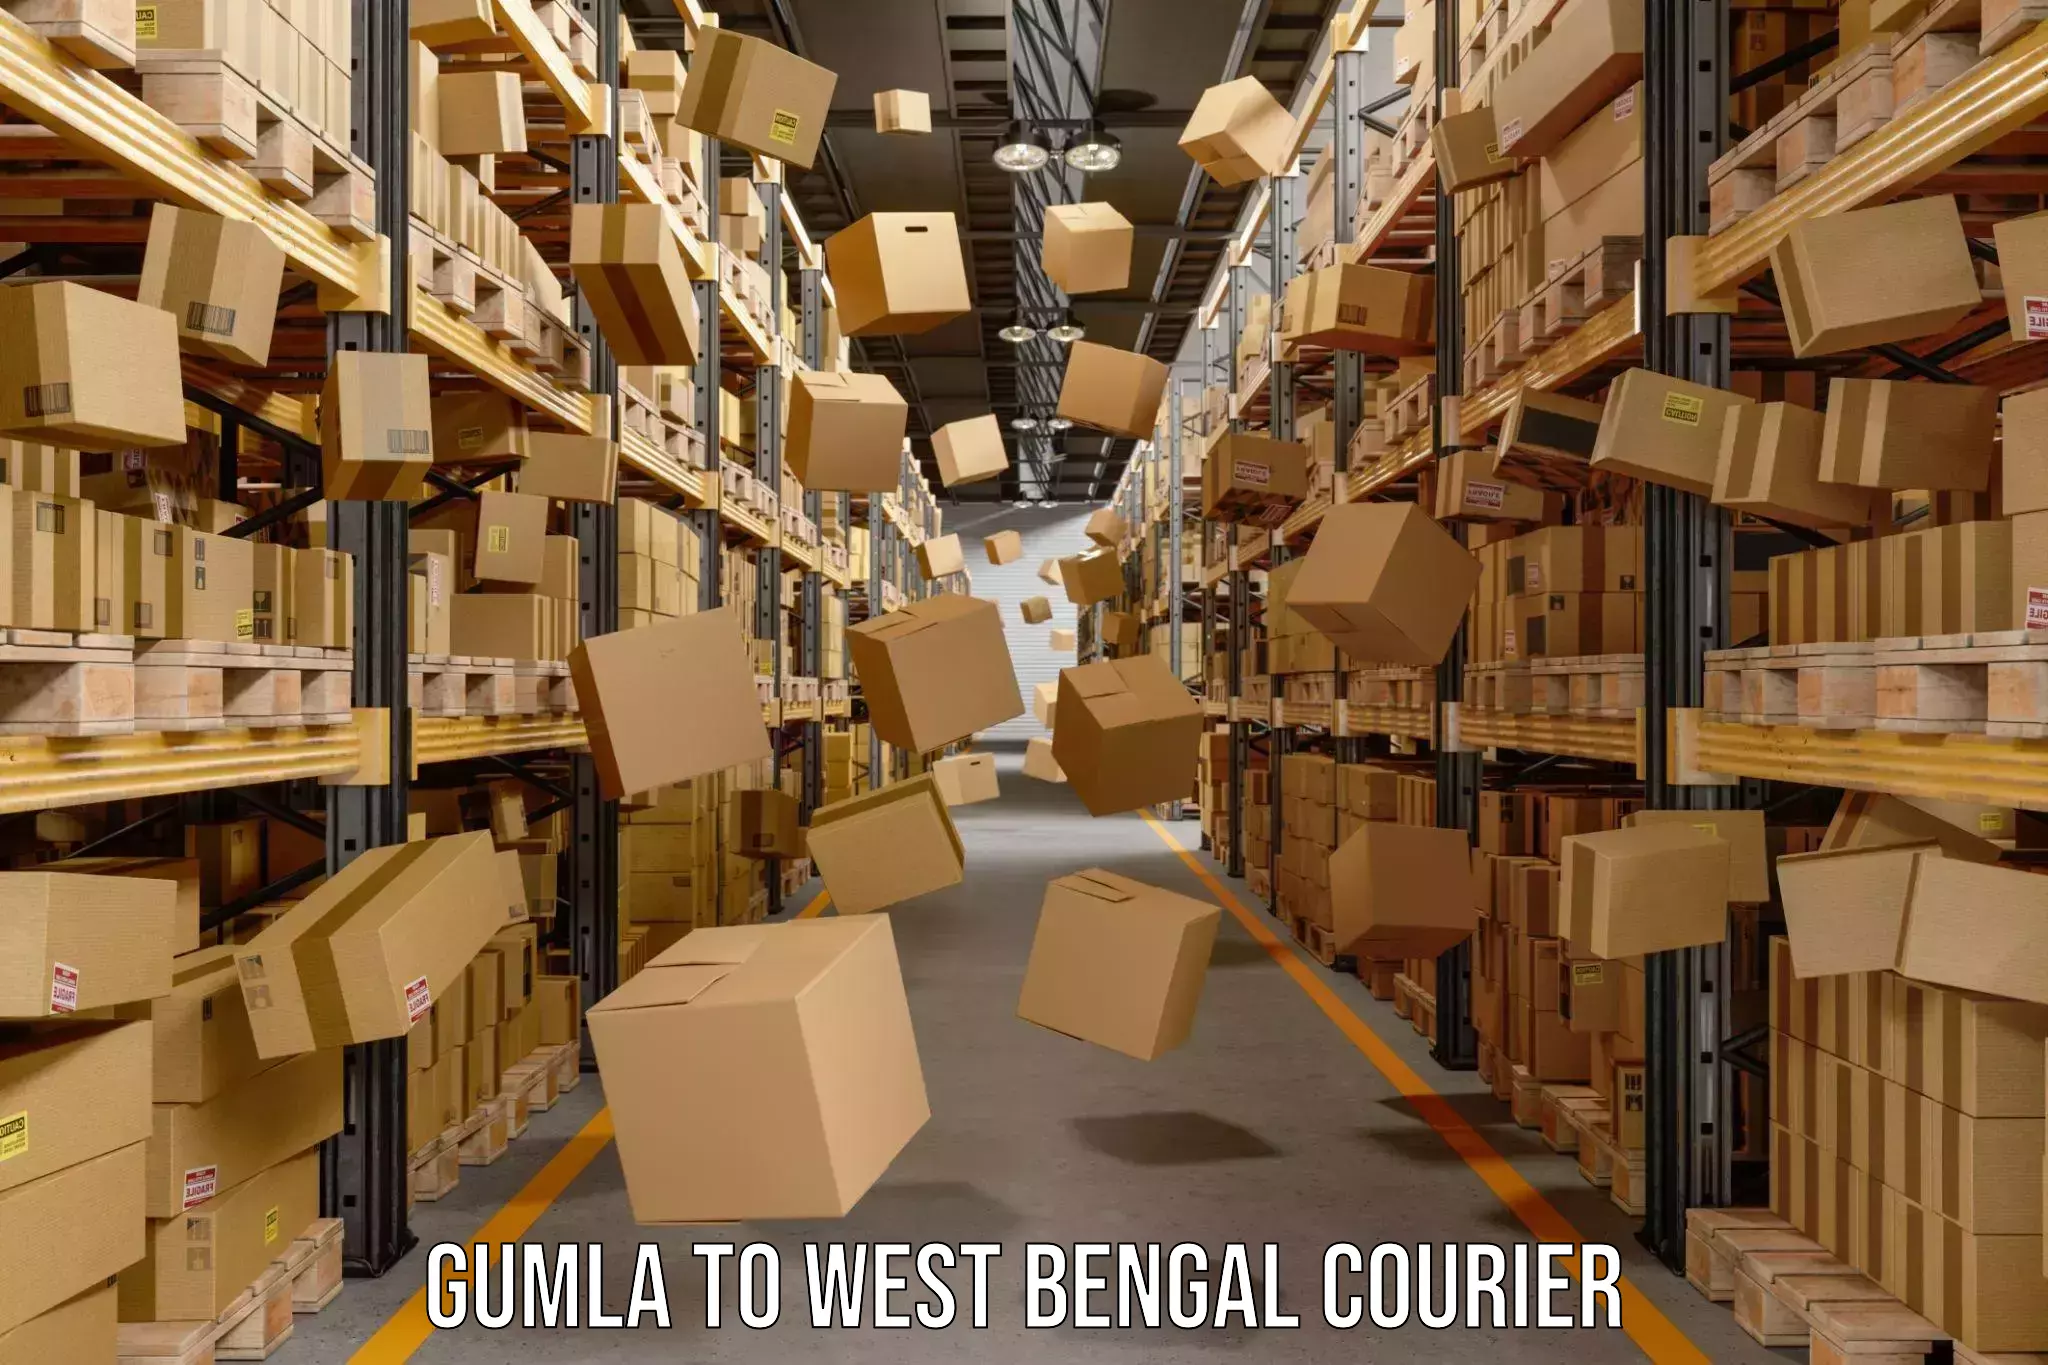 Advanced tracking systems Gumla to West Bengal